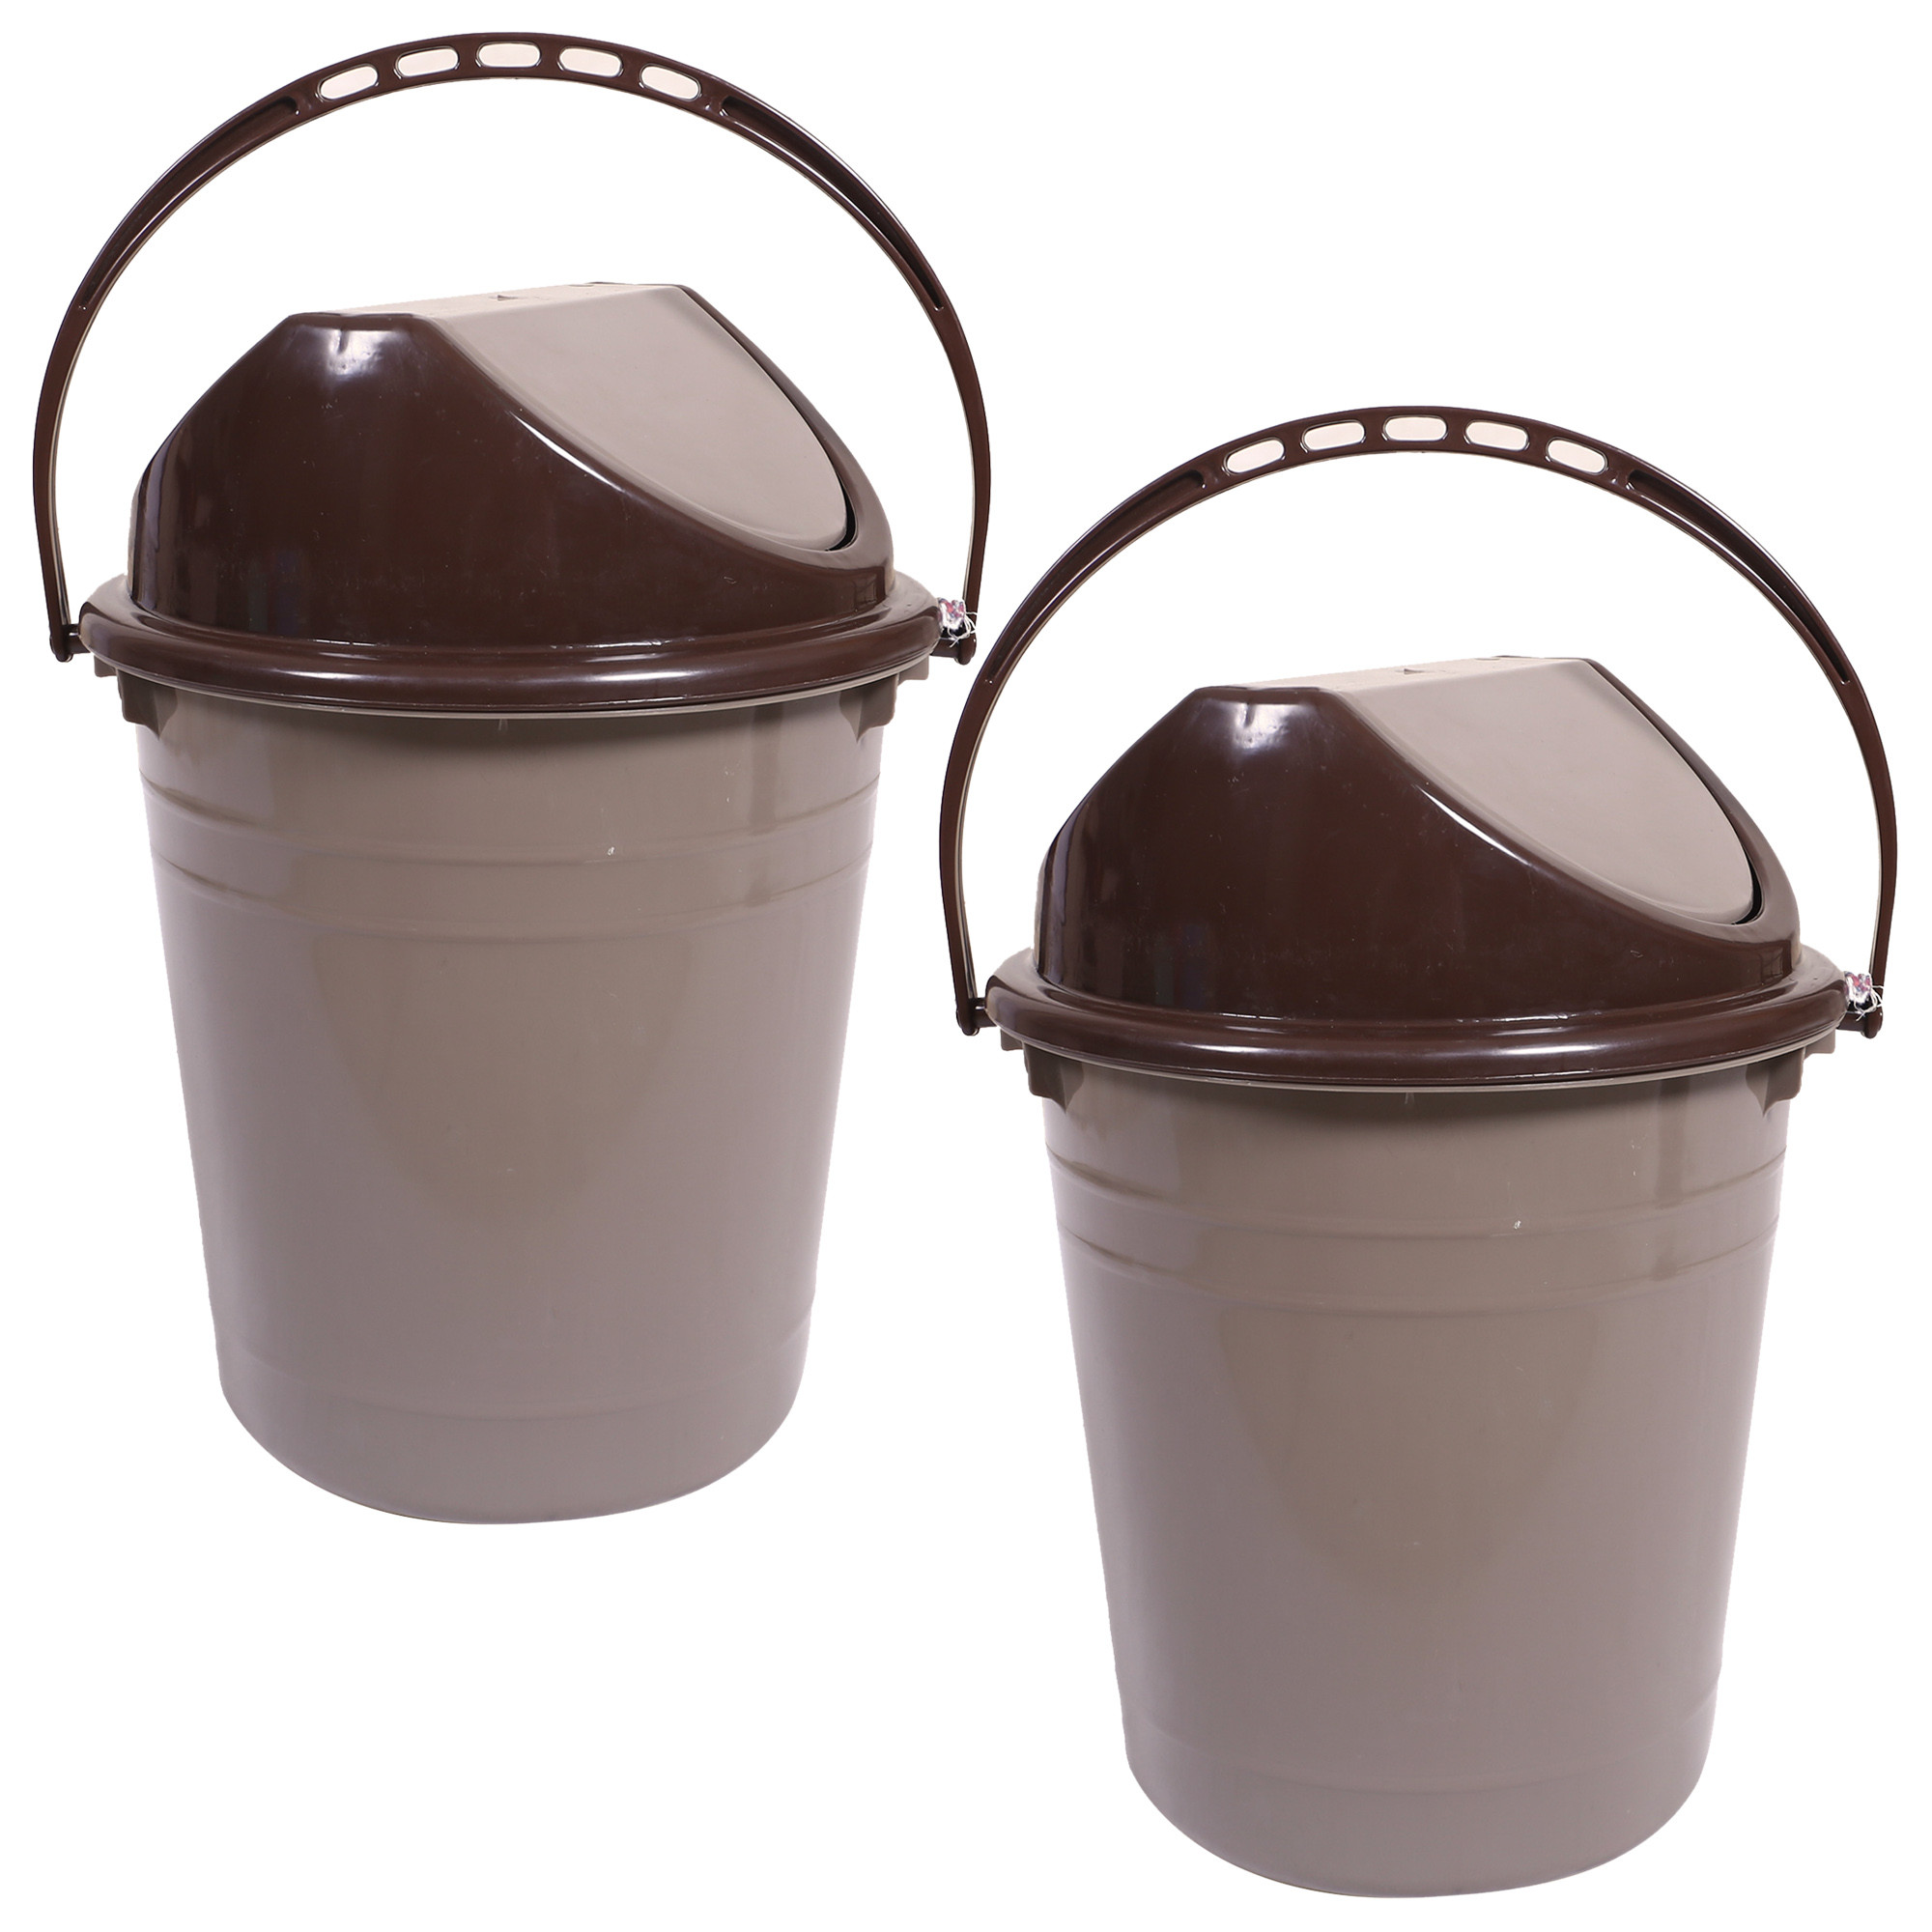 Kuber Industries Plastic Dustbin with Swinging Lid|Portable Garbage Basket & Round Trash Can for Home,Kitchen,Office,College,10 Ltr (Brown)